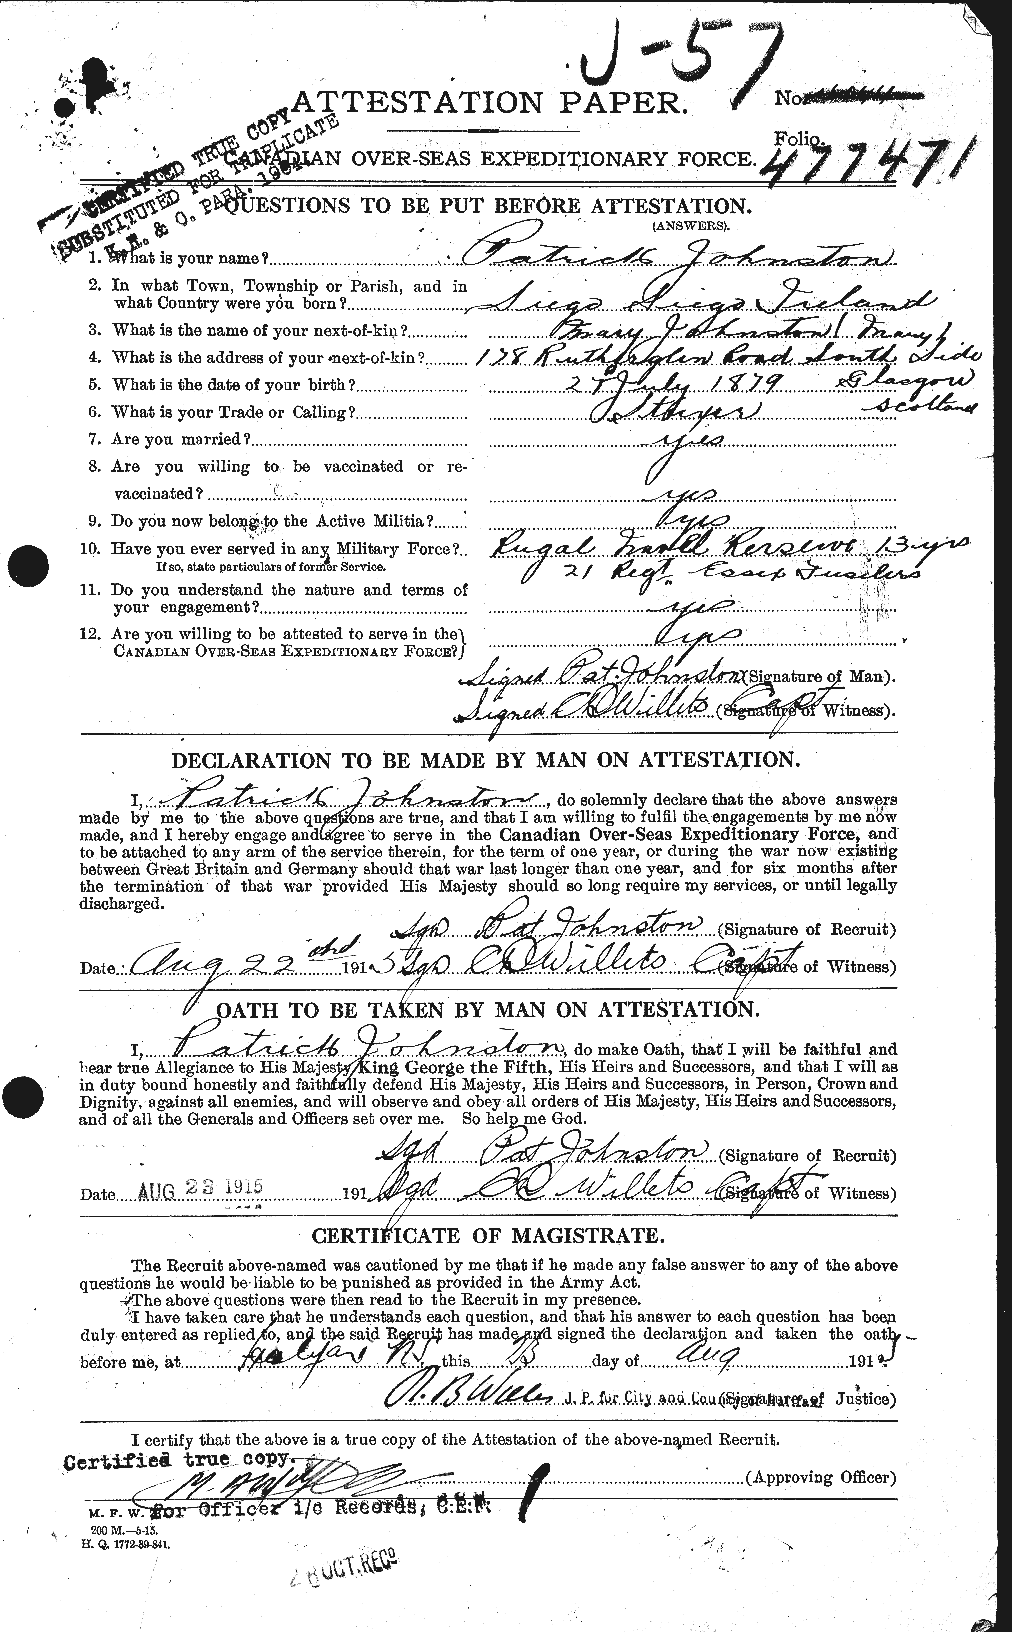 Personnel Records of the First World War - CEF 423022a